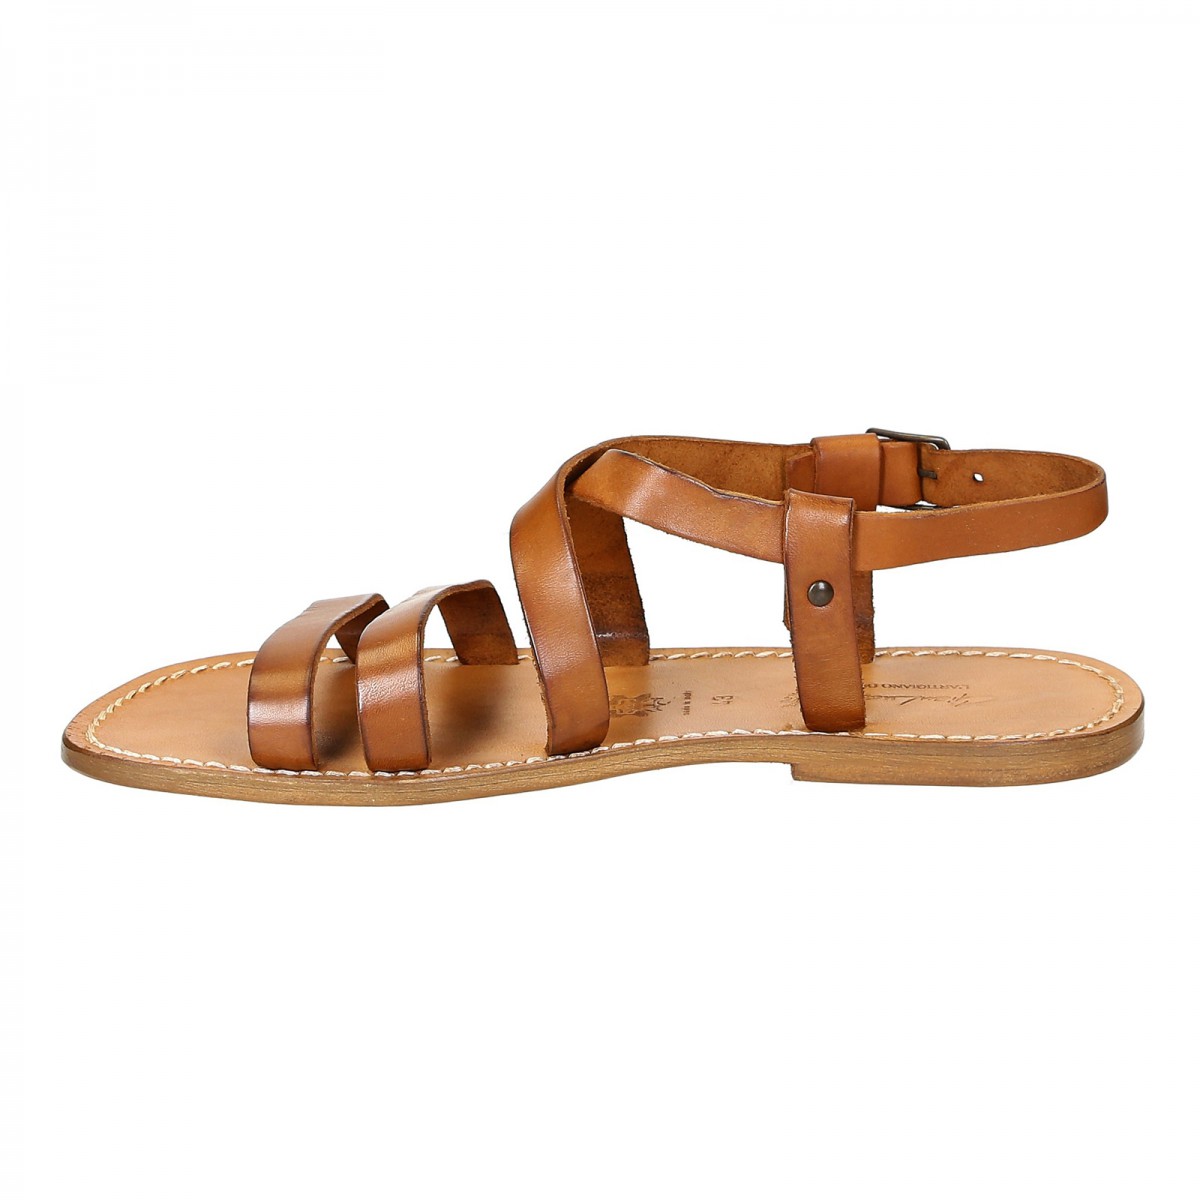 Handmade in Italy Franciscan mens sandals in vintage cuir leather | The ...